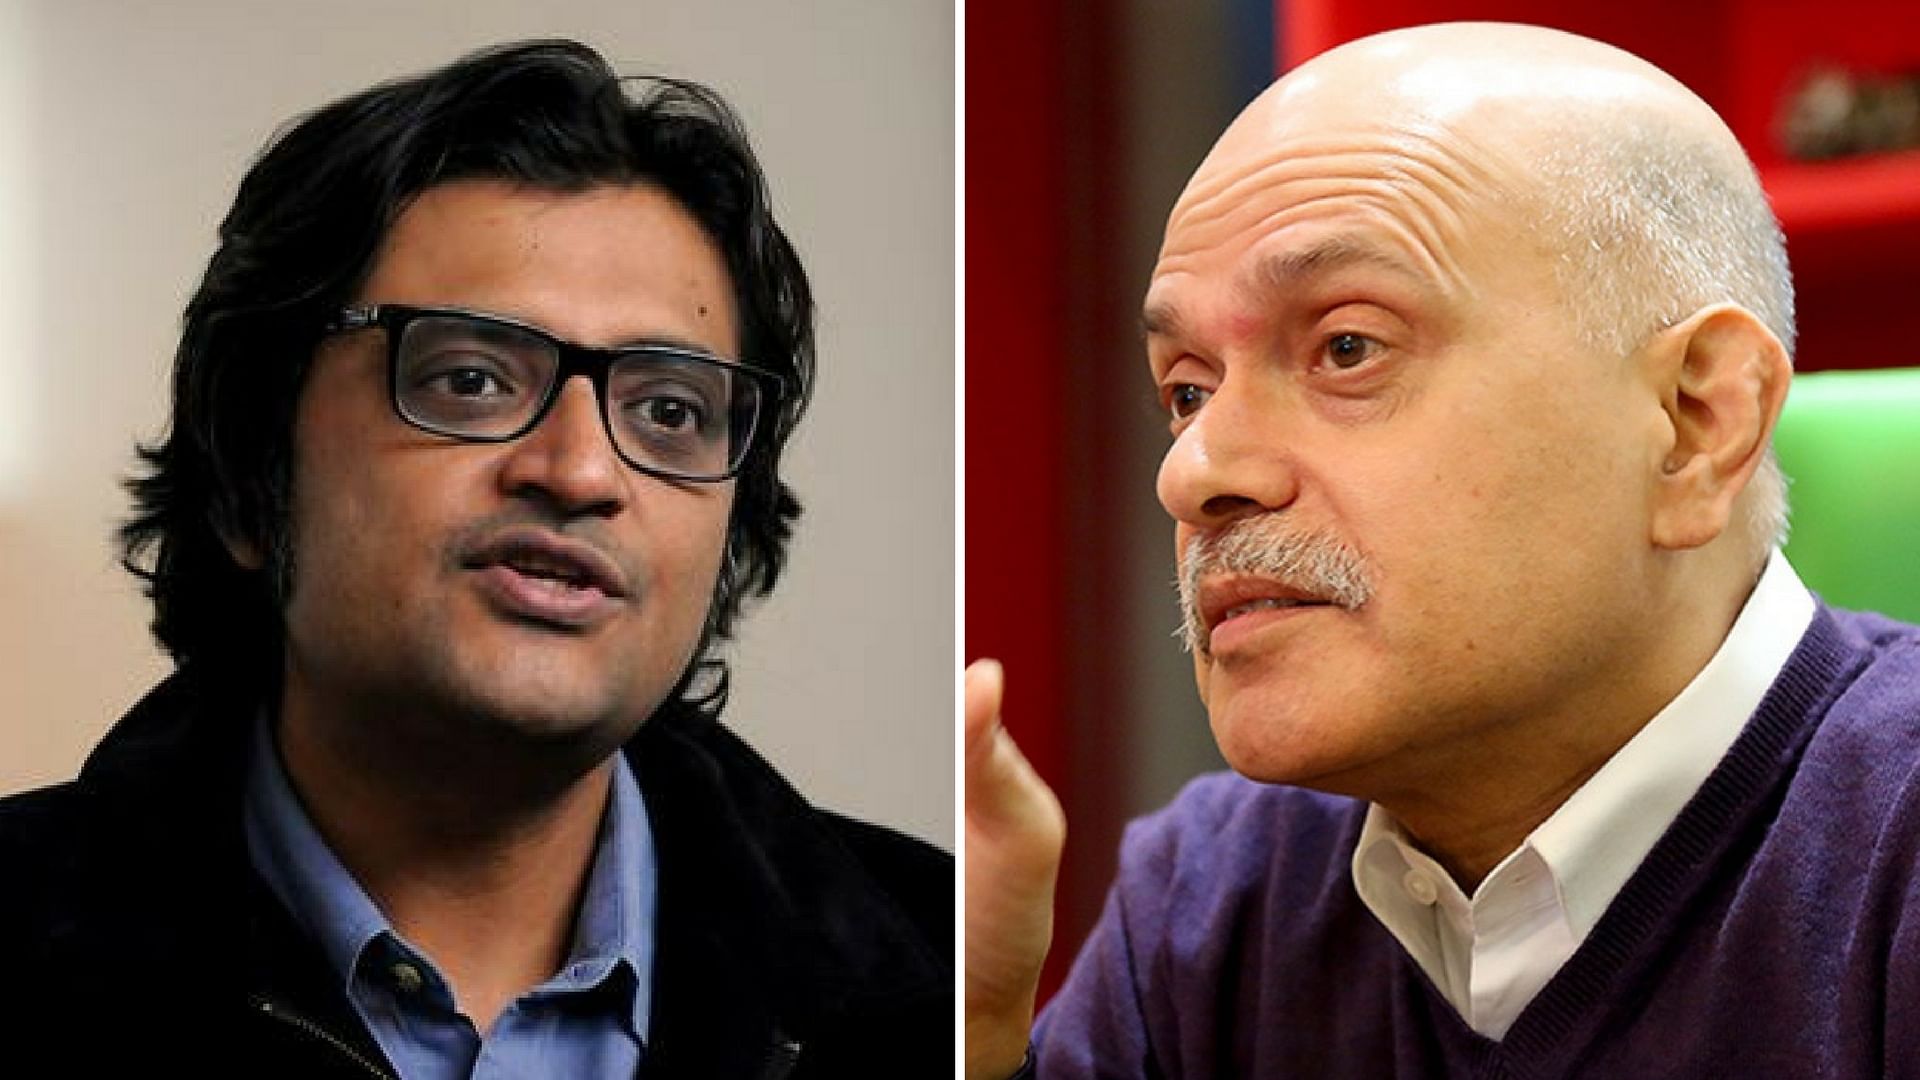 Arnab Goswami (left) and Raghav Bahl (right). (Photo: <b>Altered by The Quint</b>)